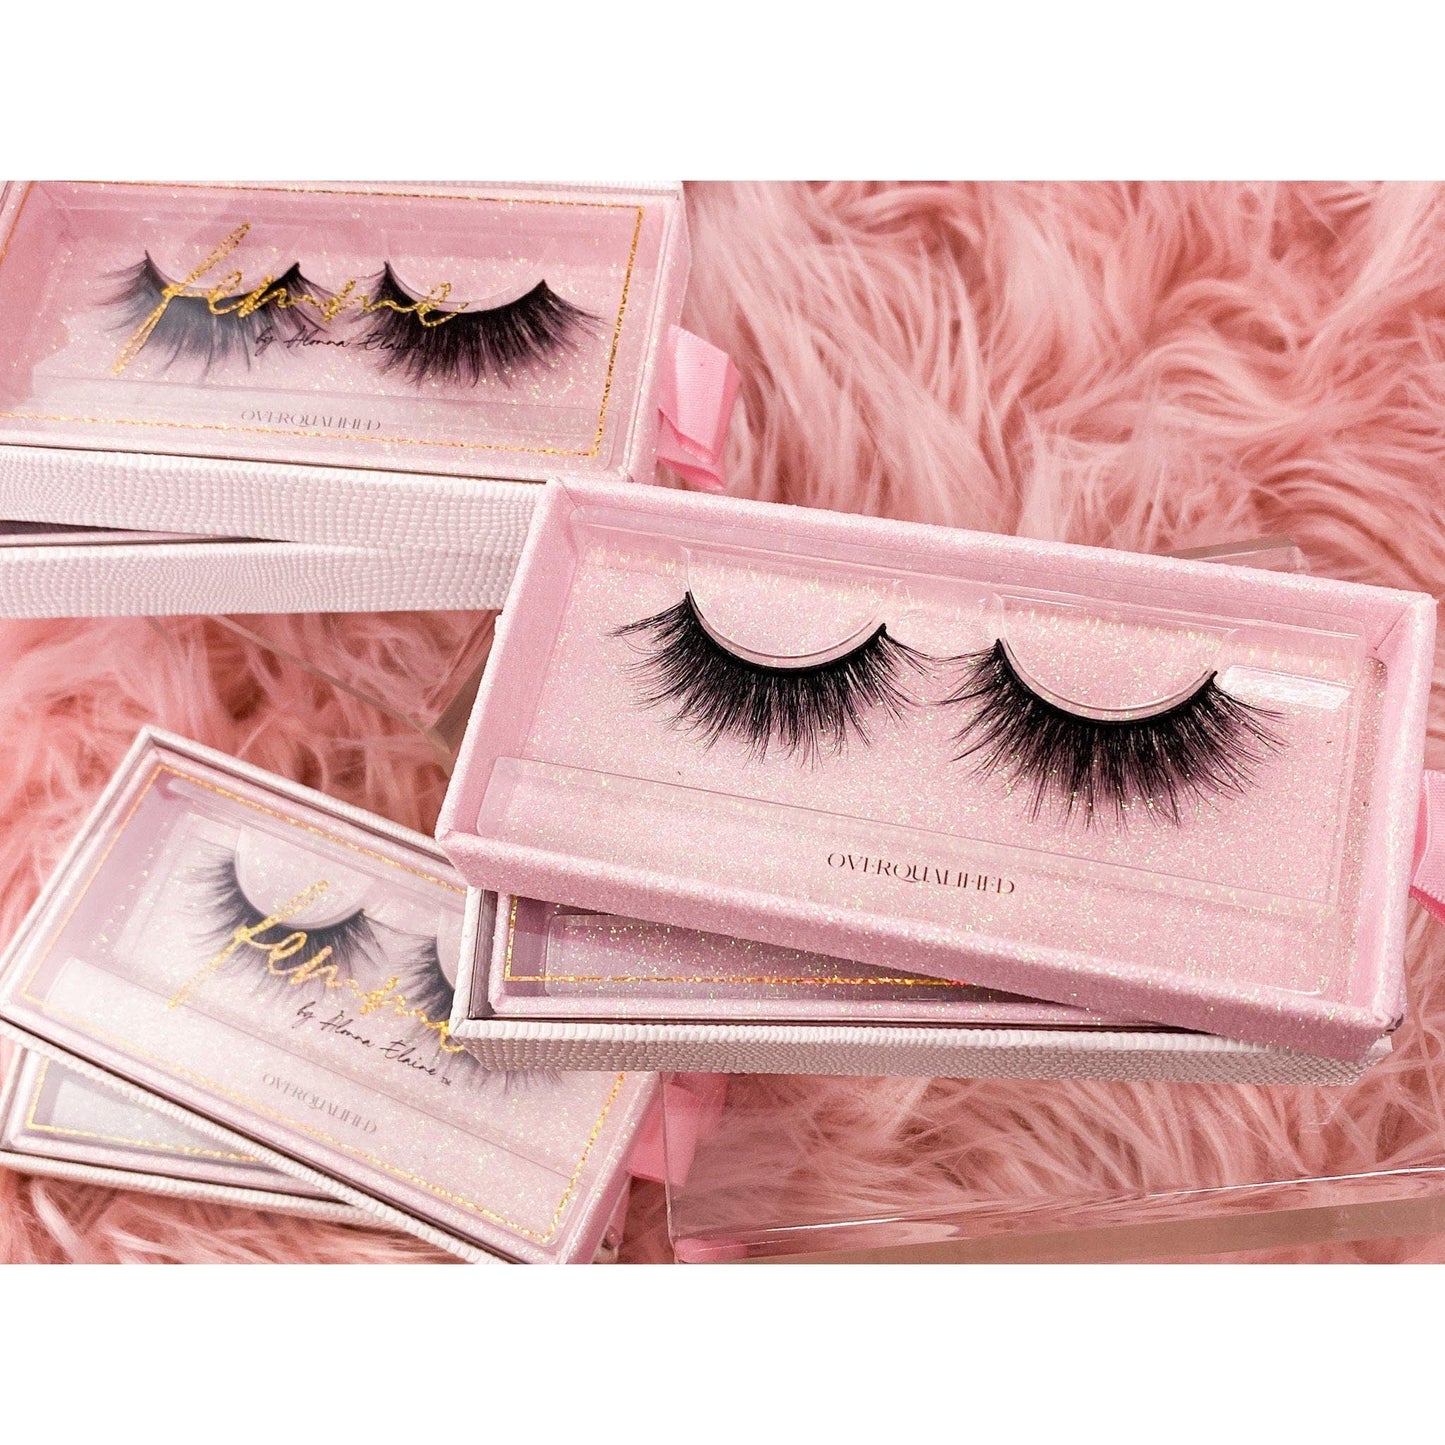 OVERQUALIFIED | luxe vegan lashes - FEMME by Alonna Elaine